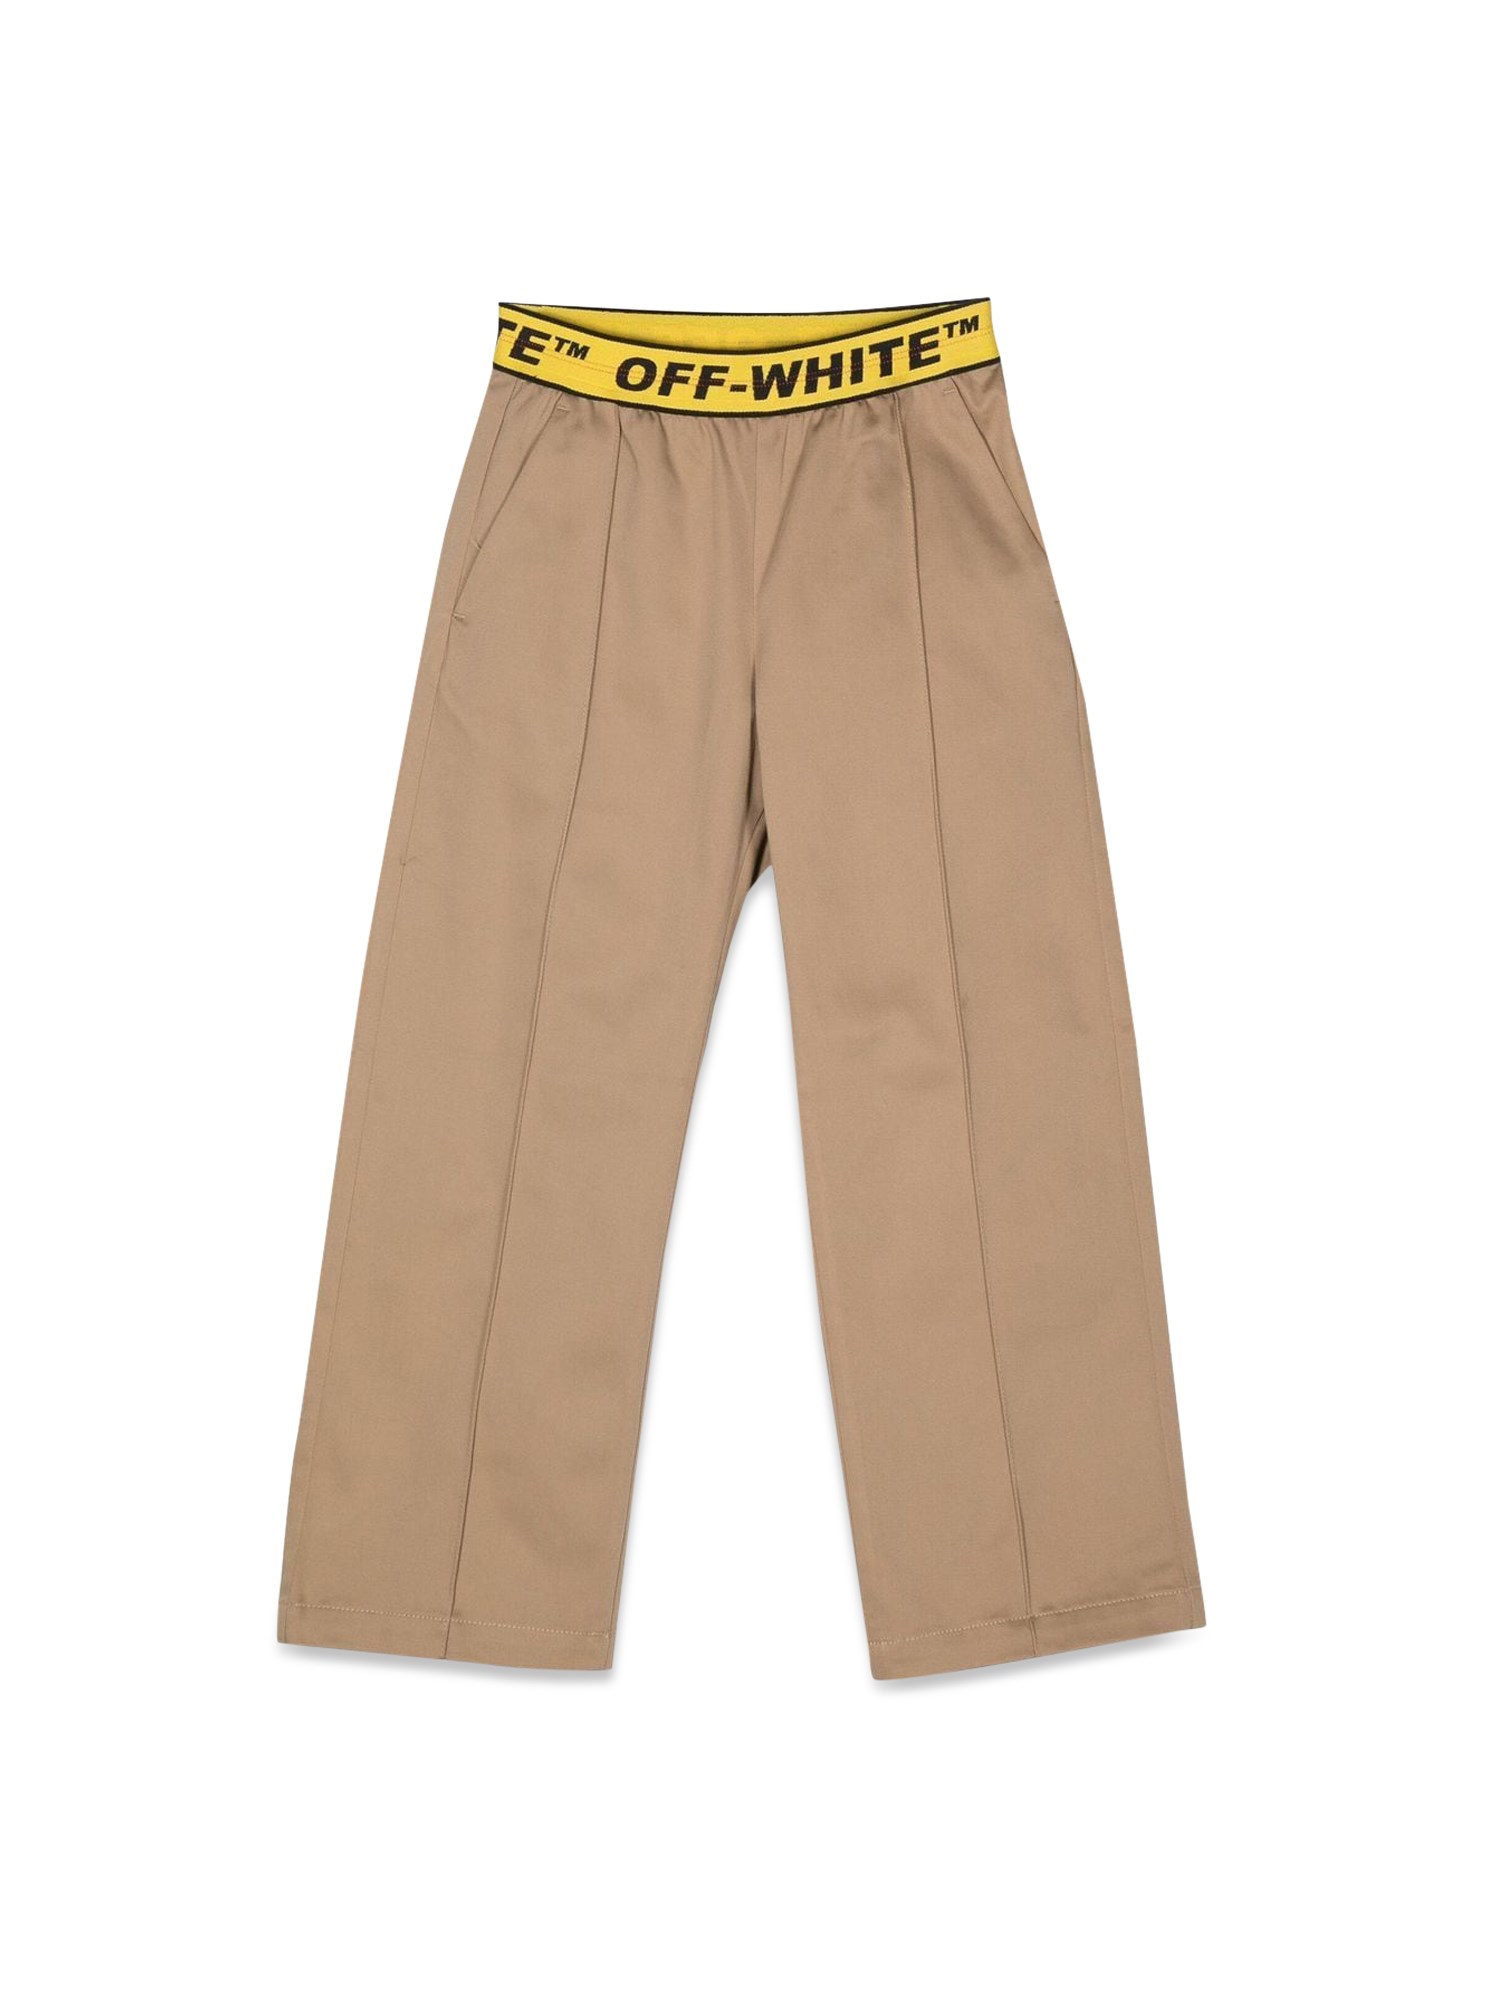 off-white industrial chino pant